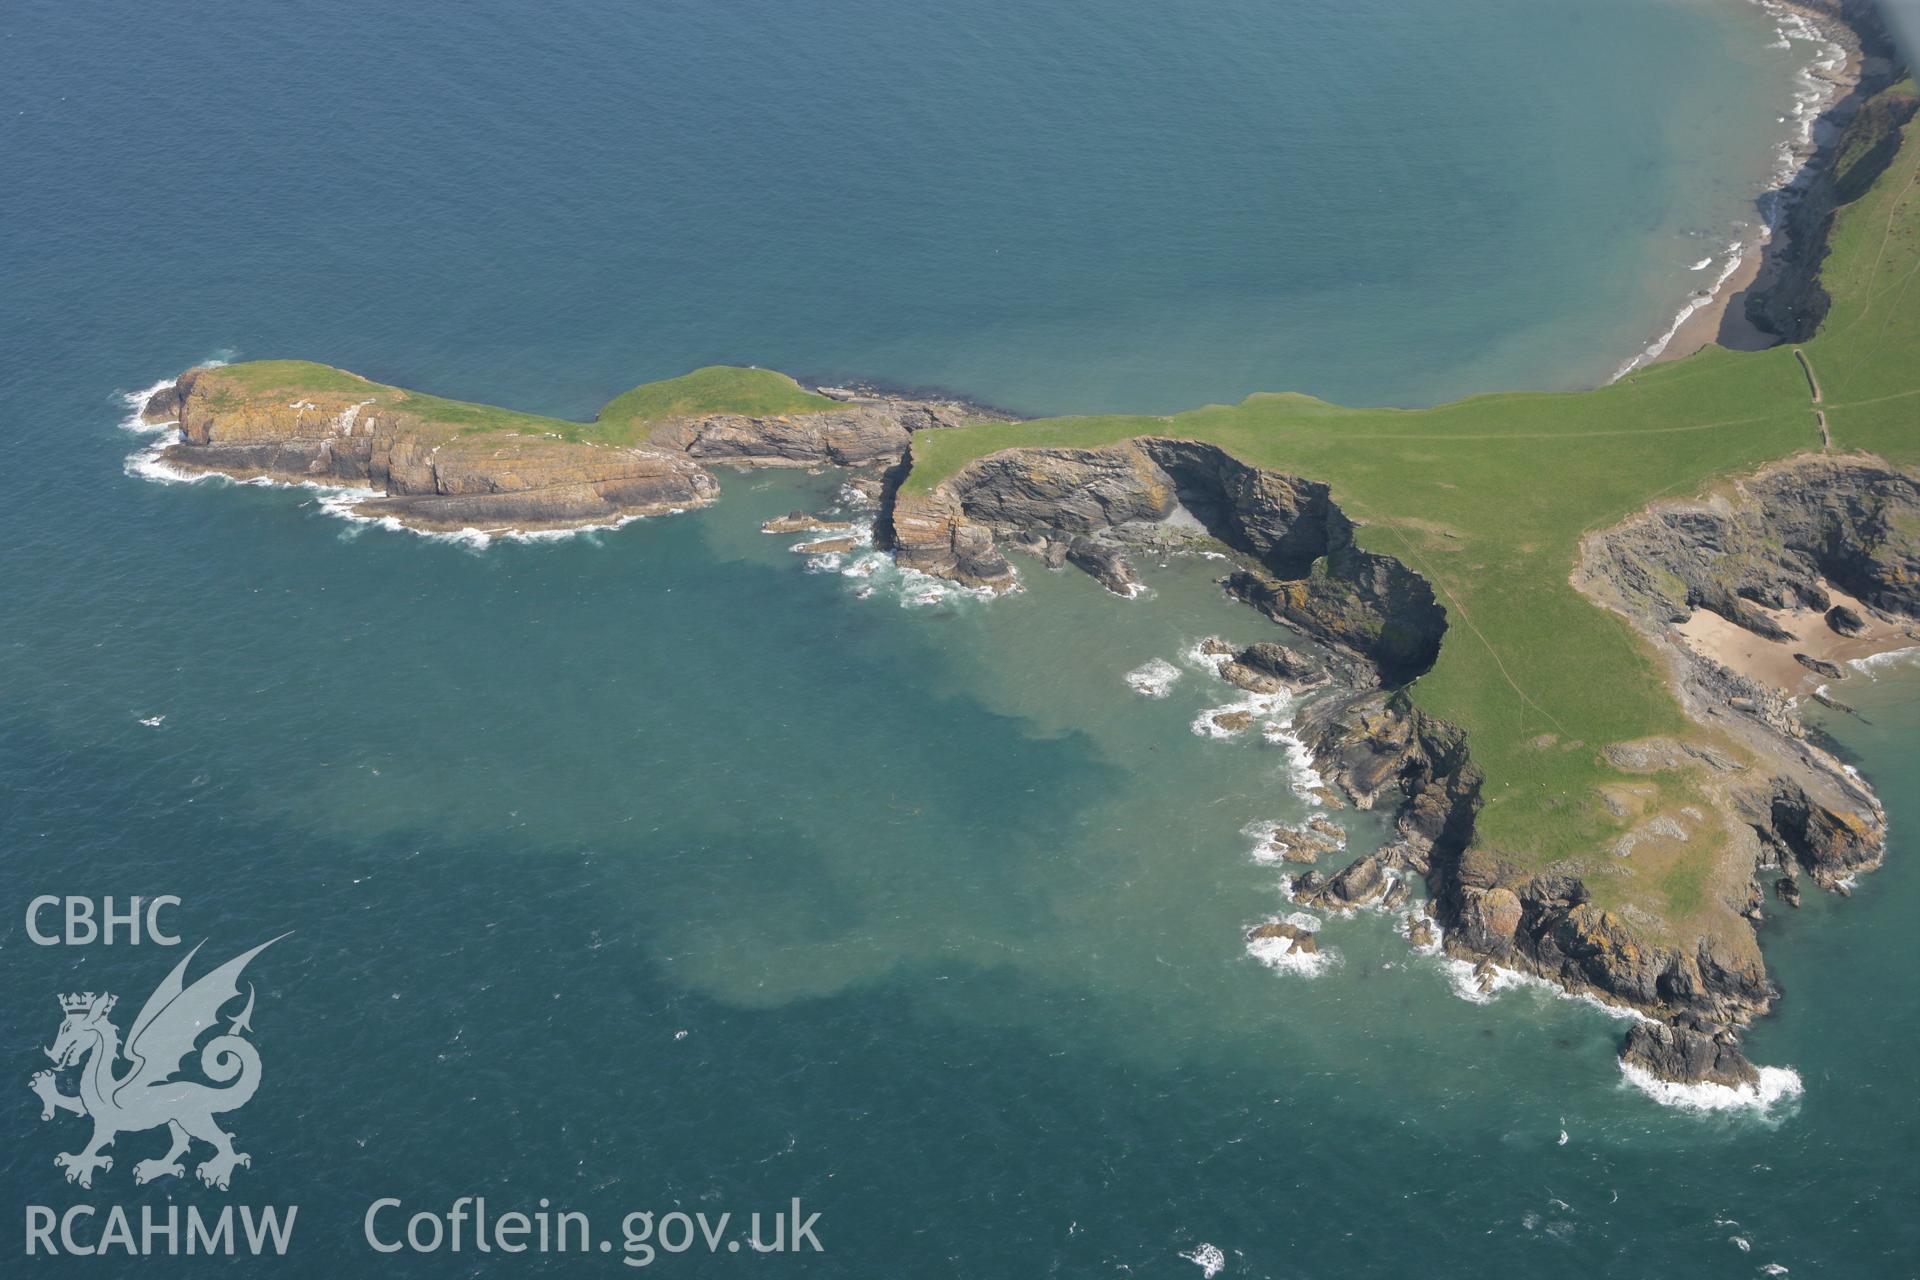 RCAHMW colour oblique photograph of Ynys Lochtyn, promontory fort. Taken by Toby Driver on 25/05/2010.